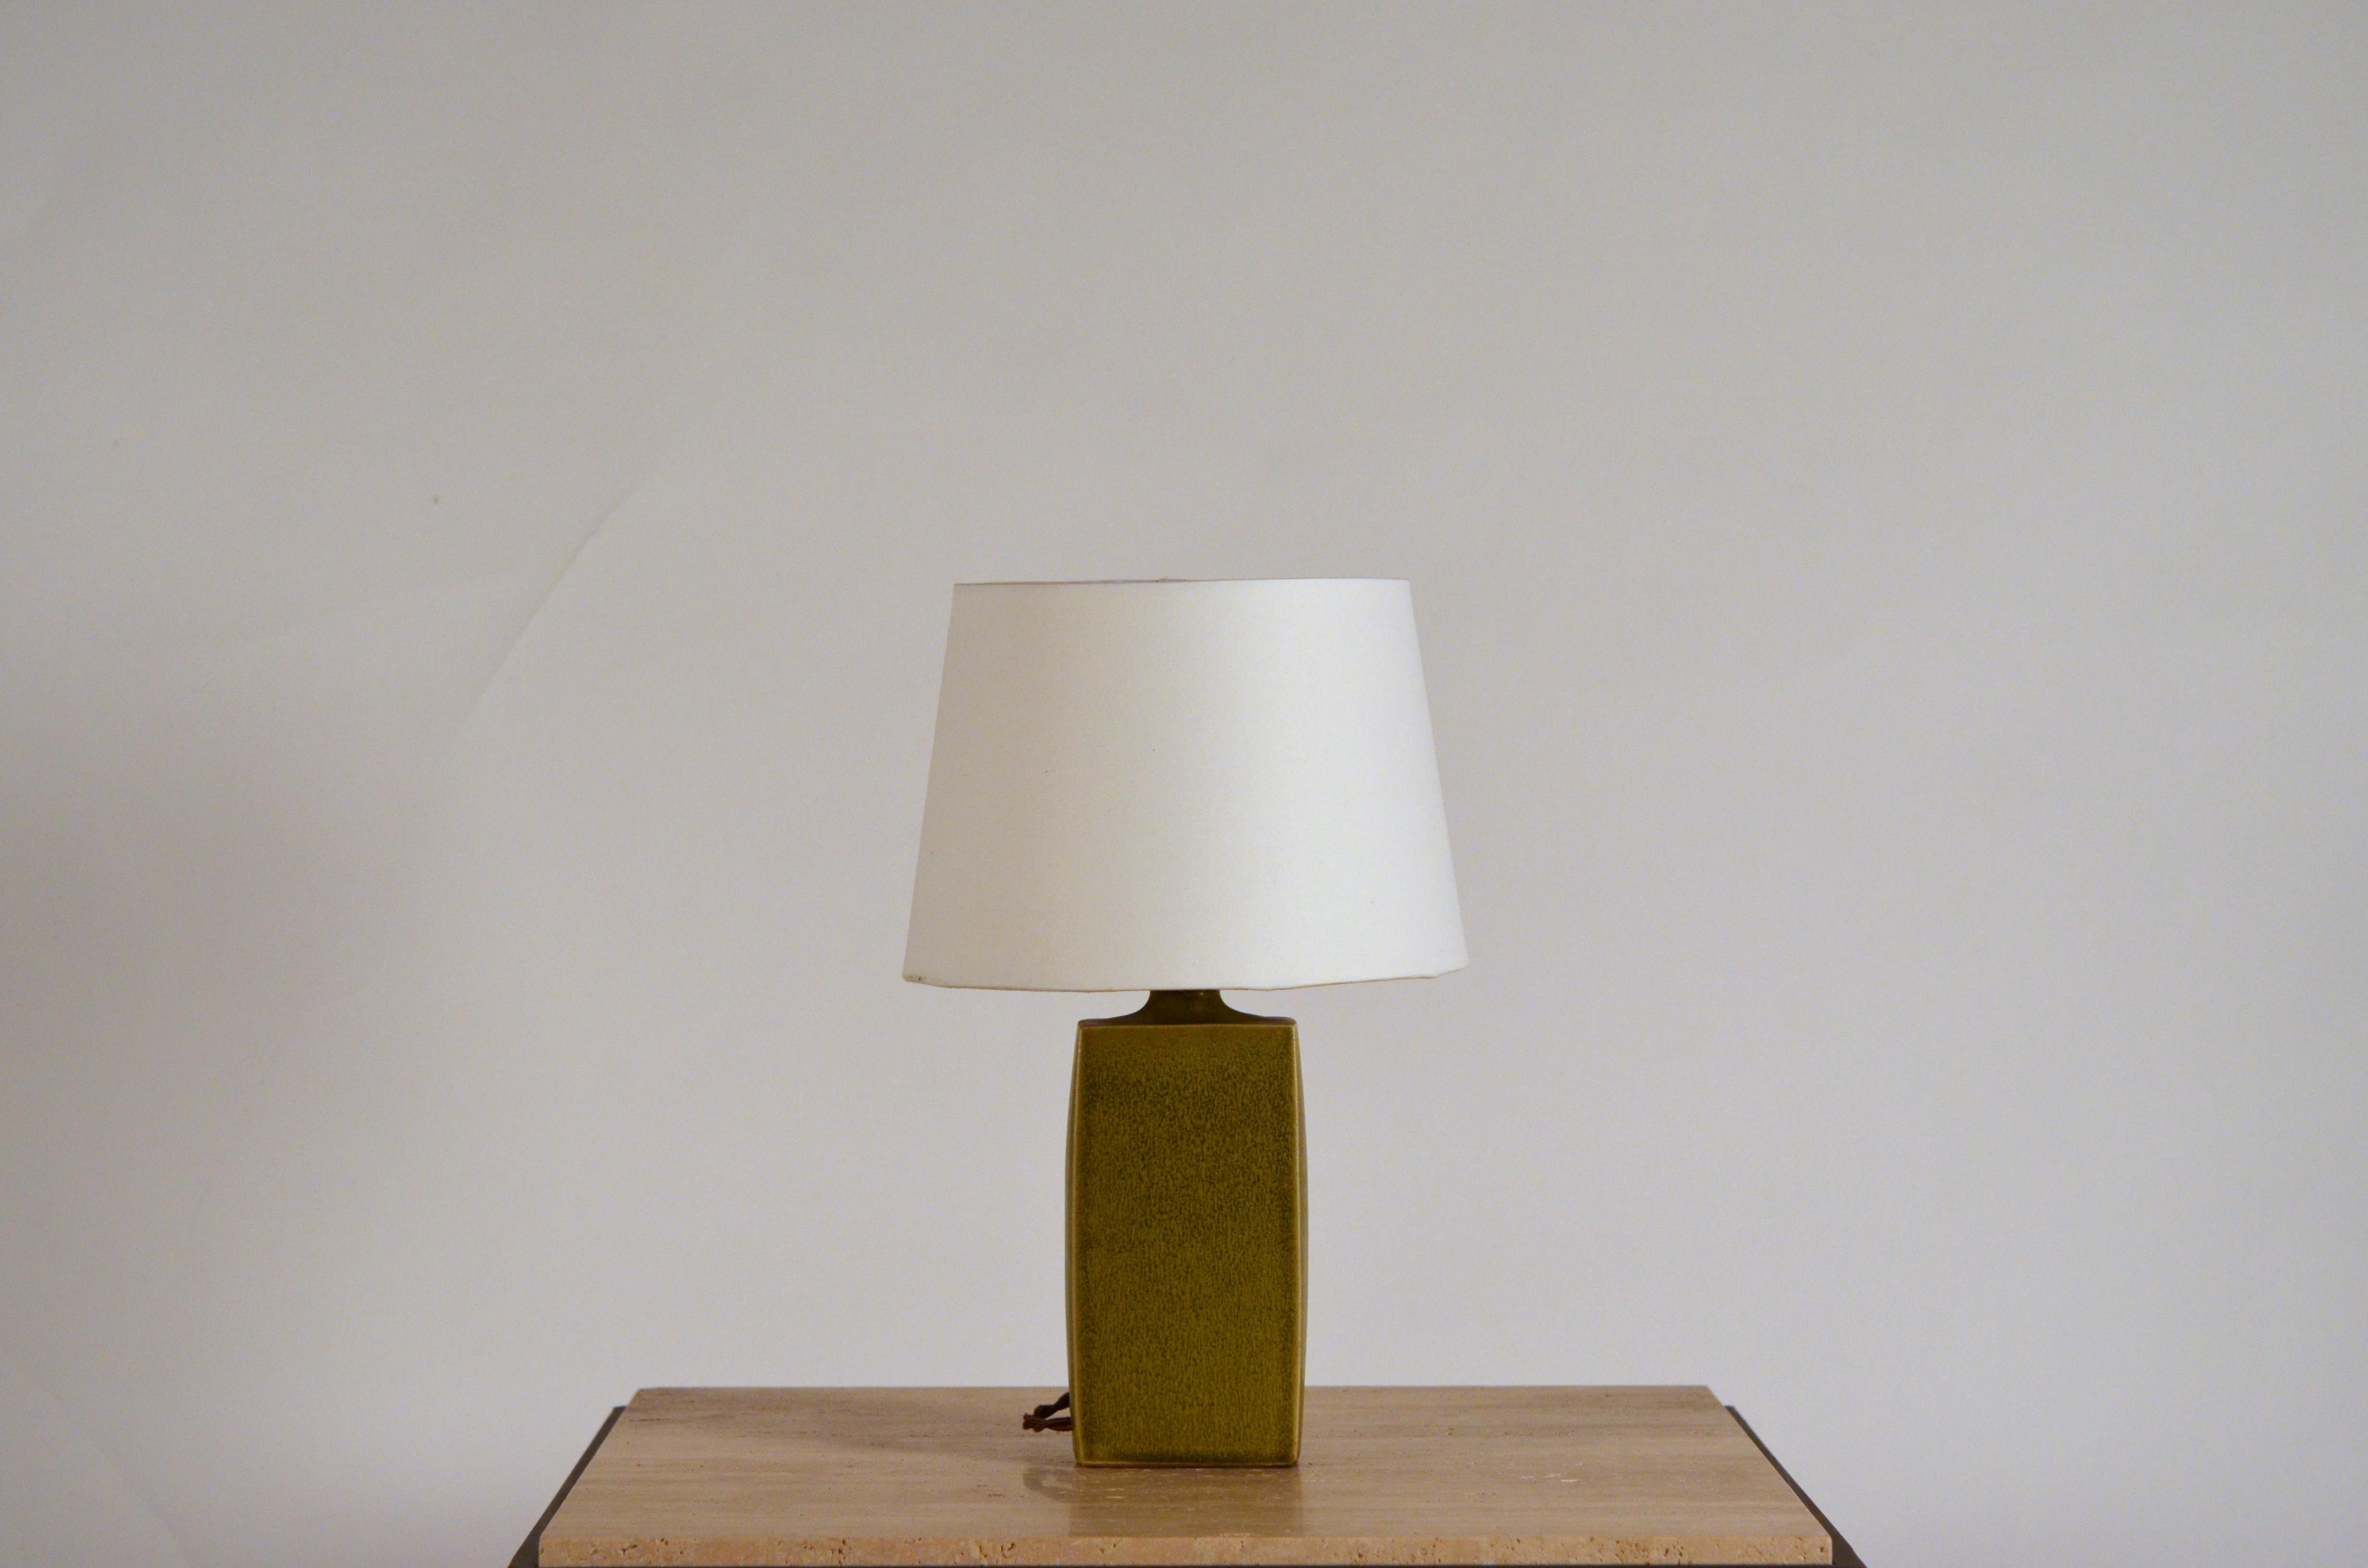 Chic glazed ceramic lamp with parchment shade. Very simple and elegant.

Attractive European style shade mount with no apparent harp / final.

The dimensions are the overall dimensions of the lamp and the shade together. The shade is 10 in.